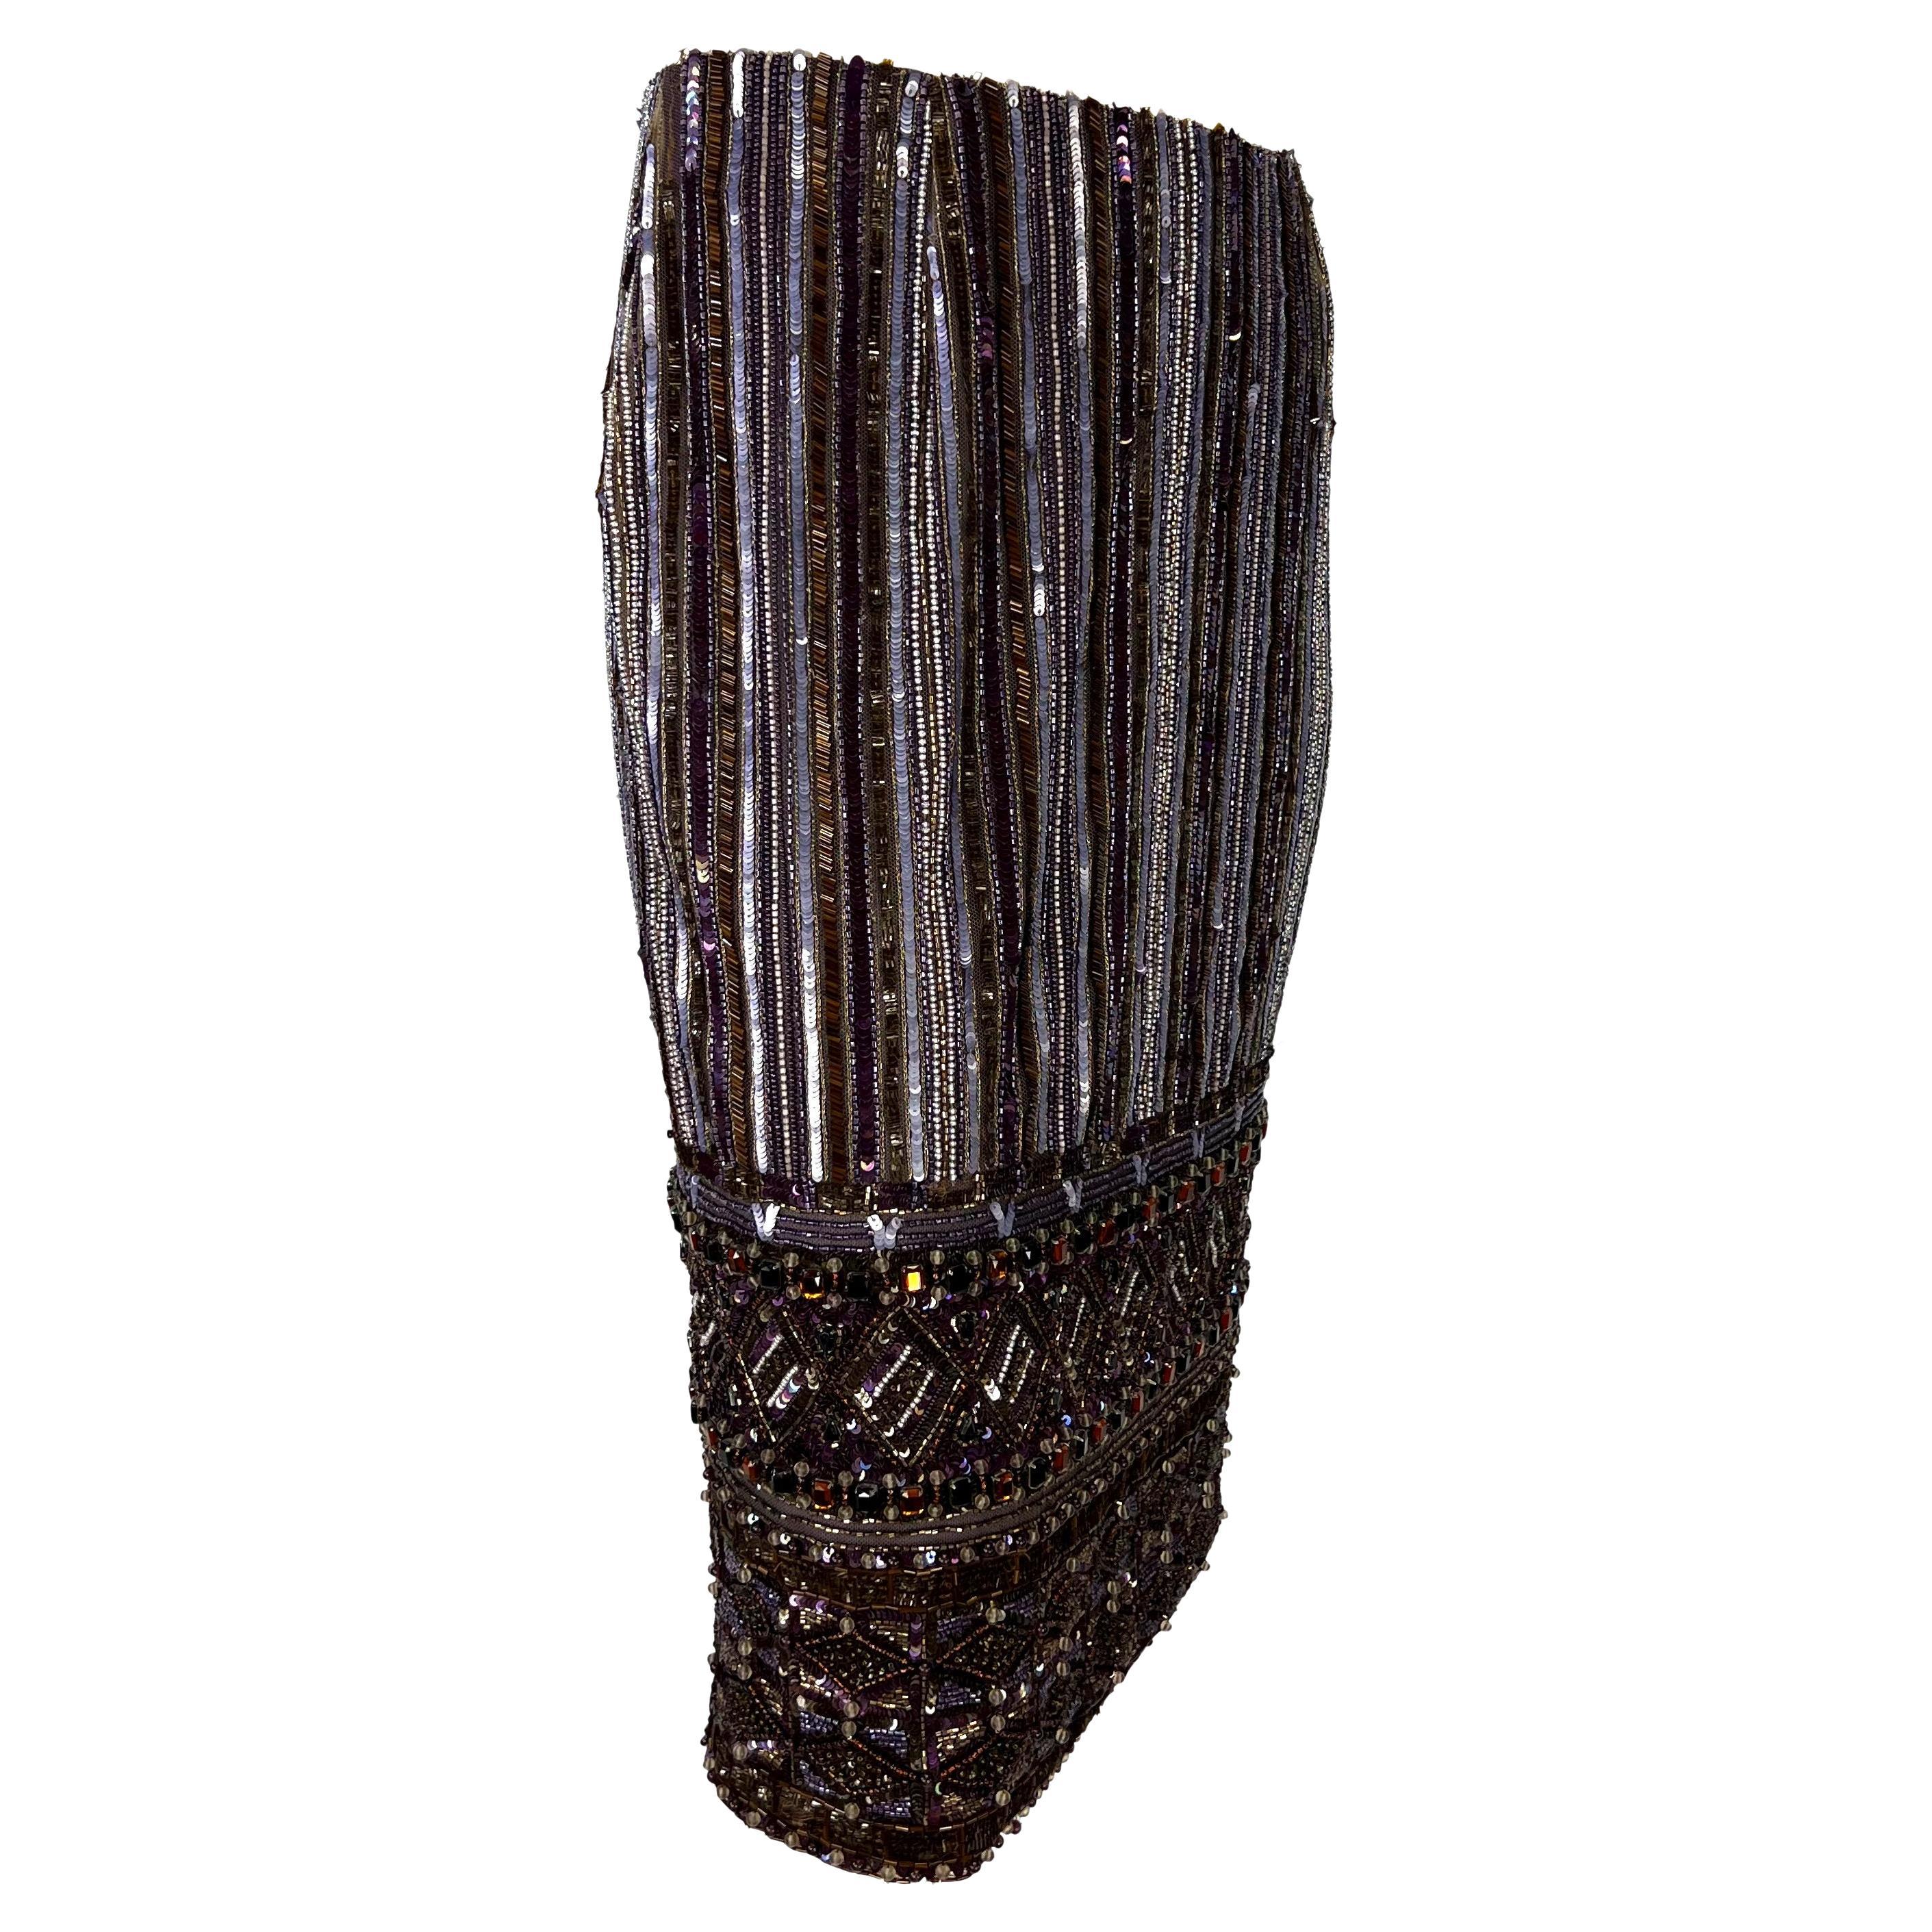 Early 2000s Valentino Garavani Aubergine Rhinestone Heavily Beaded Pencil Skirt In Good Condition For Sale In West Hollywood, CA